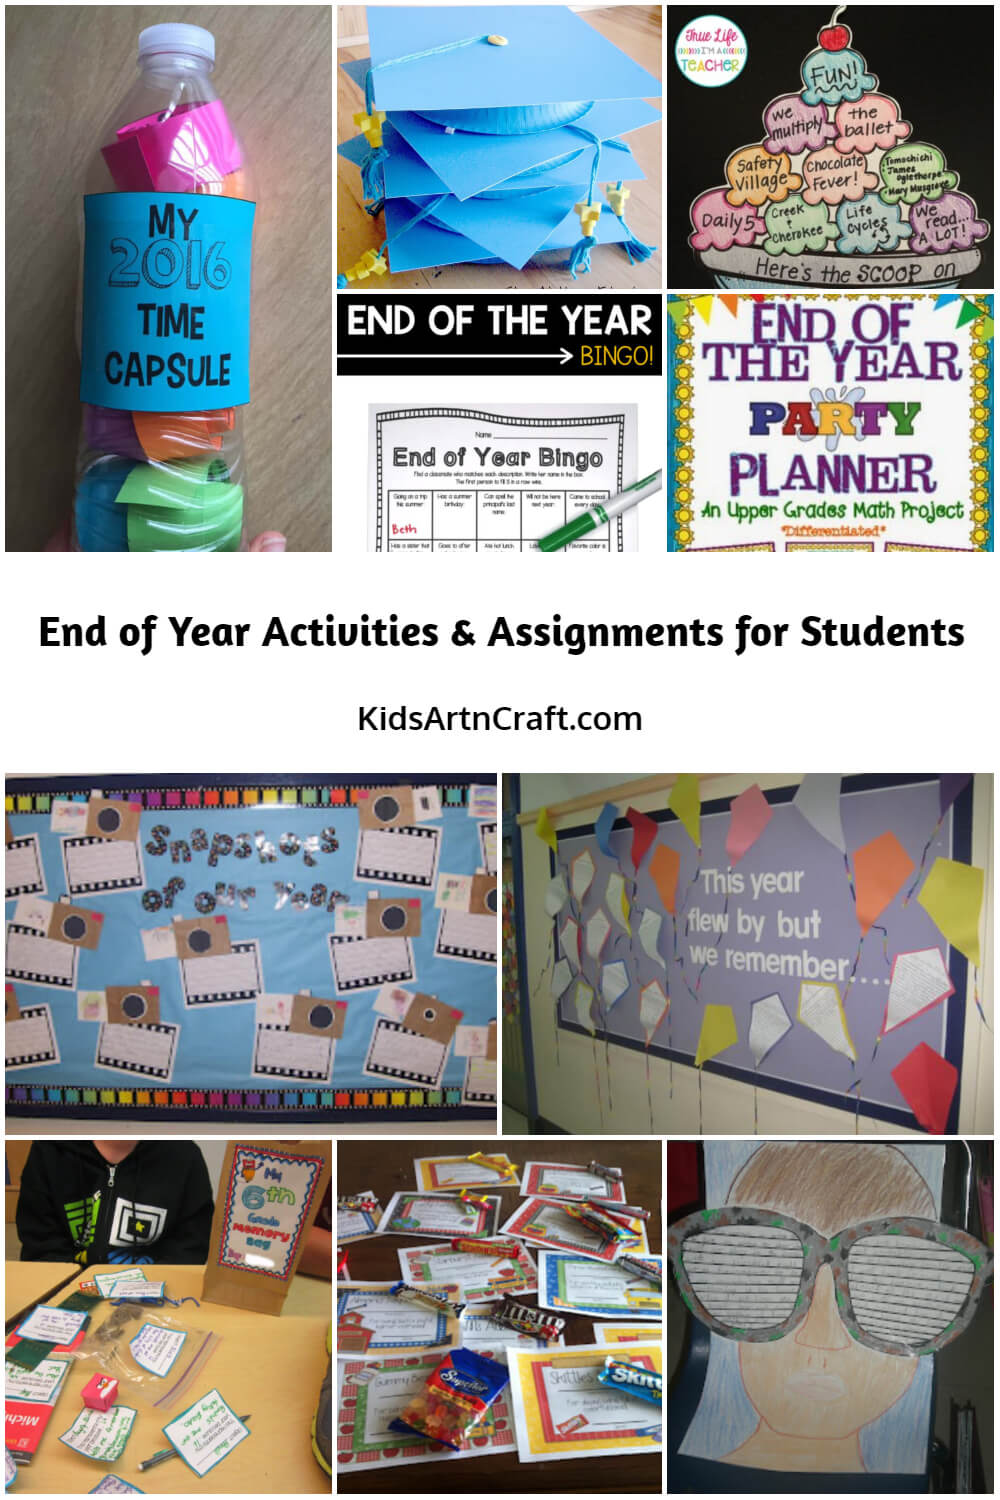 End of Year Activities & Assignments for Students